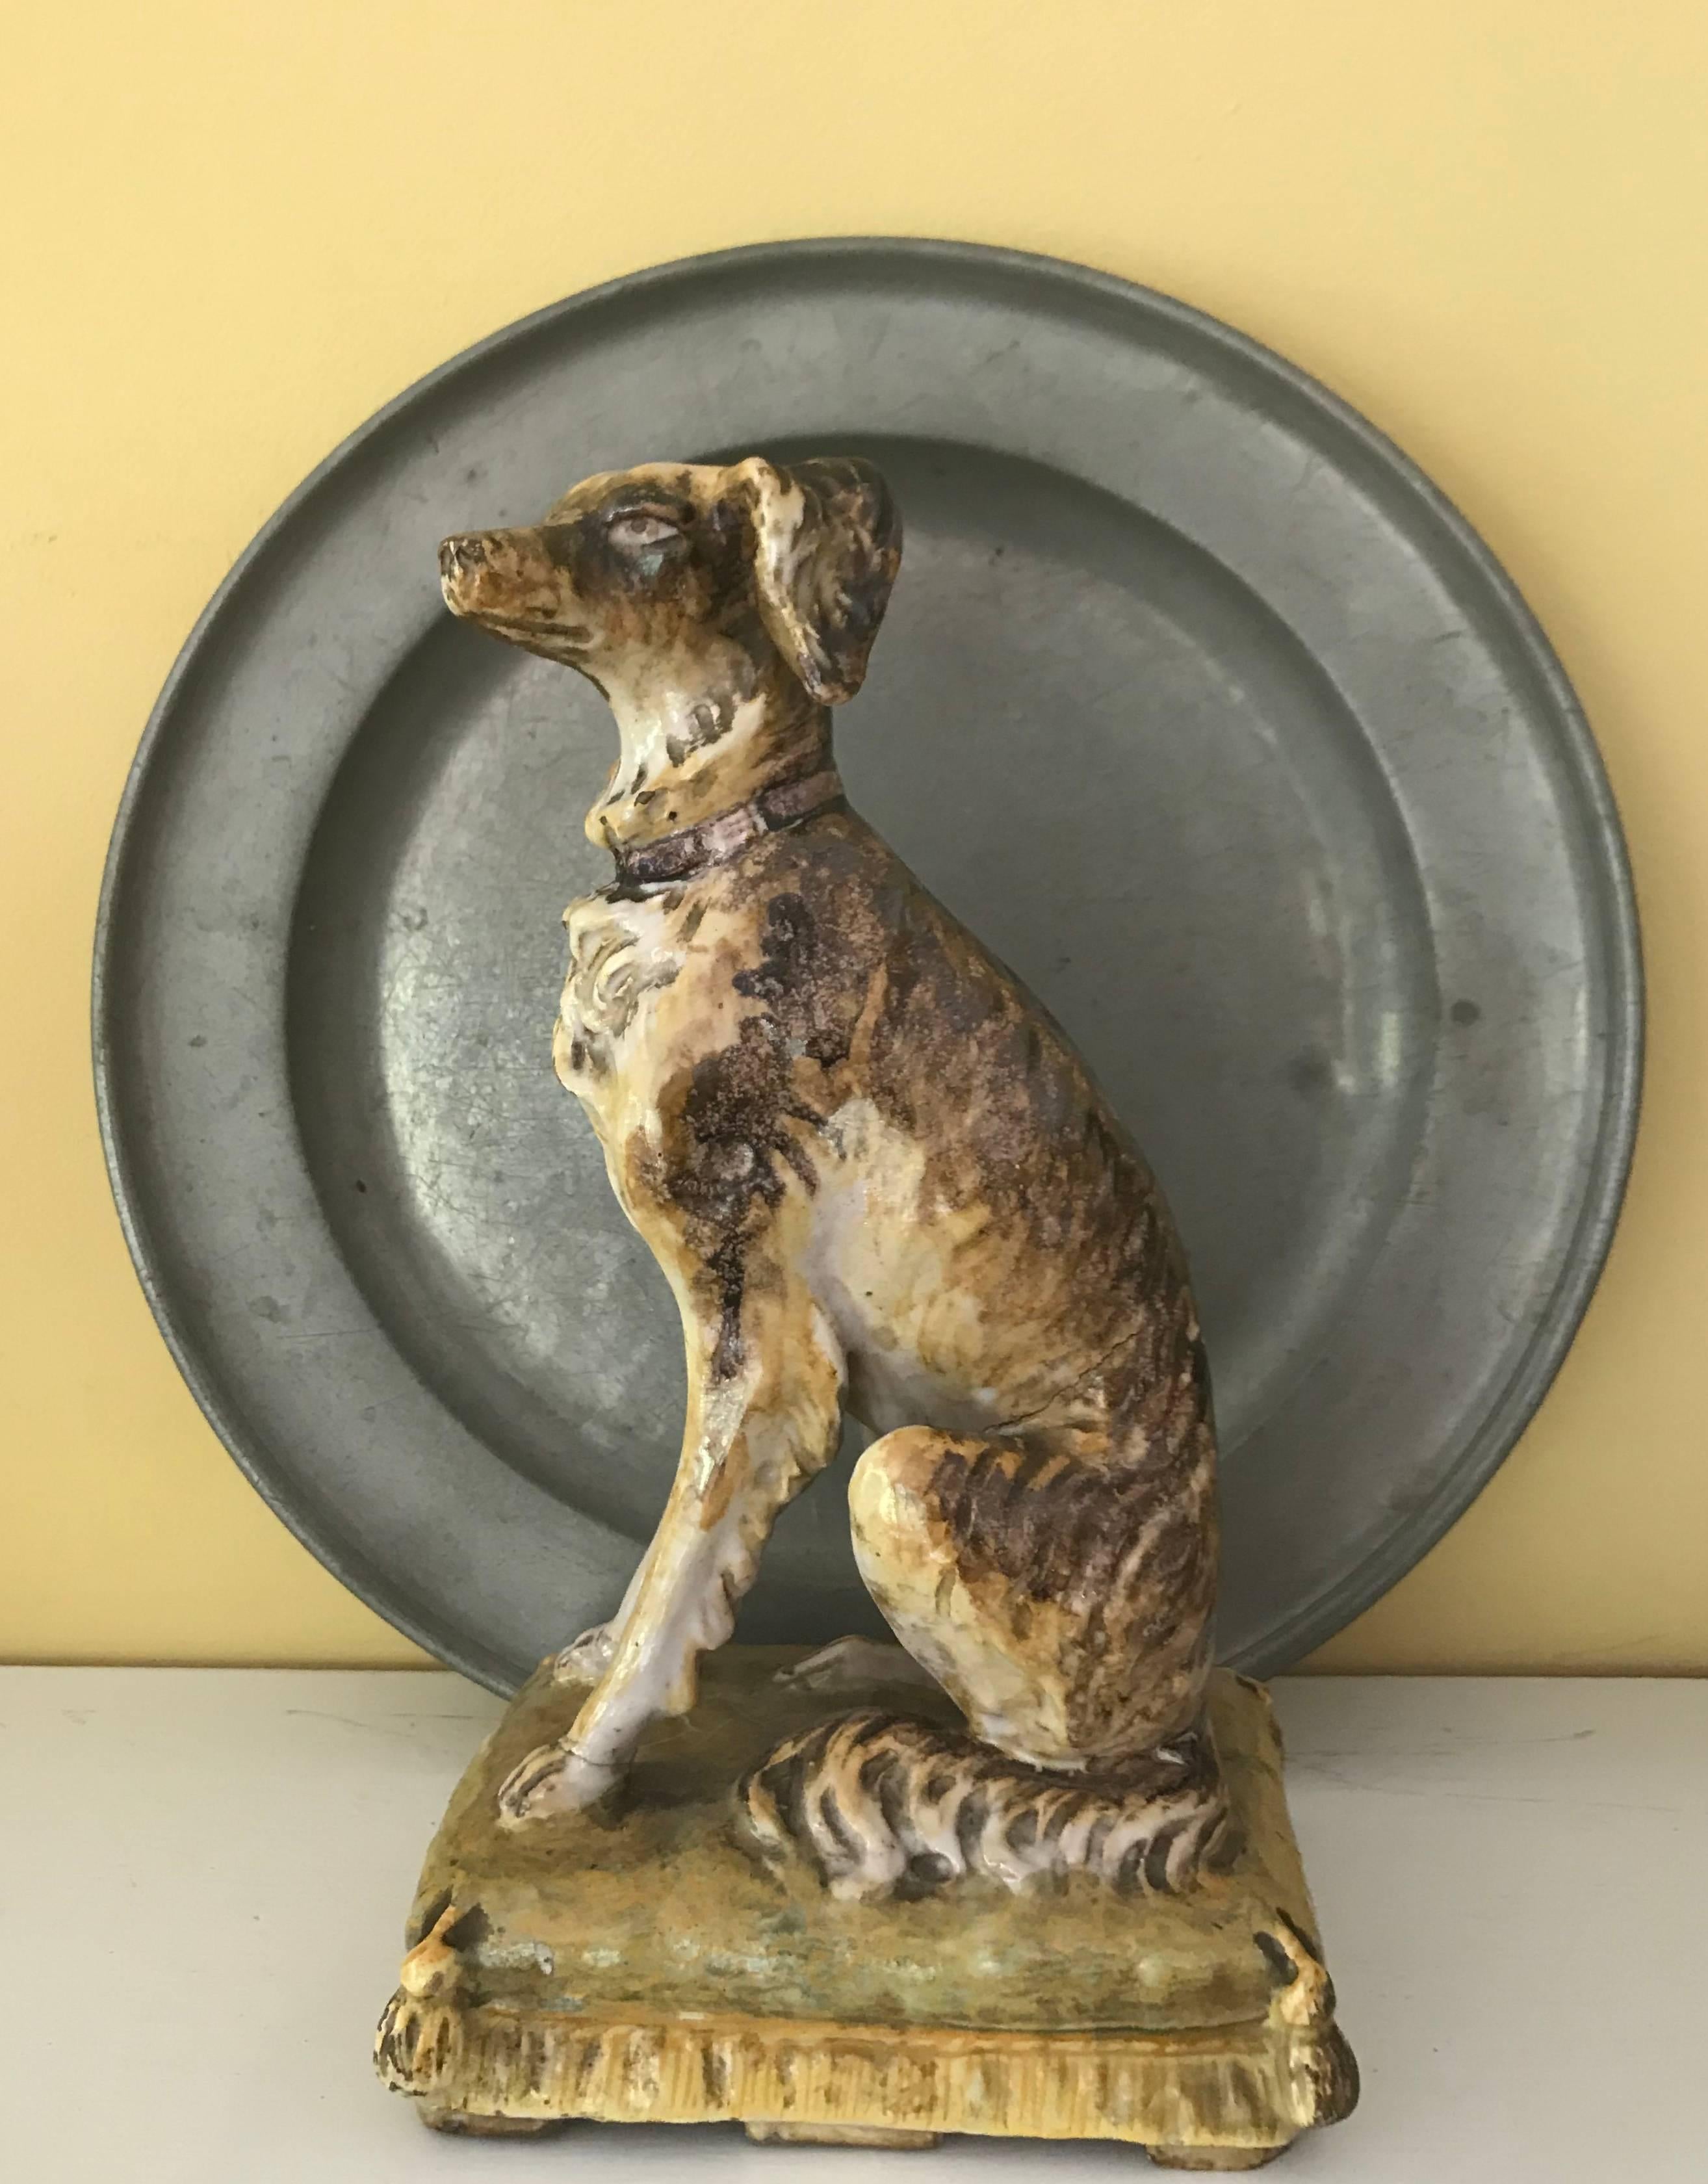 Italian dog sculpture. Italian long-haired hound dog figure beautifully modeled and softly colored, seated on a yellow floor cushion, Italy, mid-19th century.
Dimensions: 4